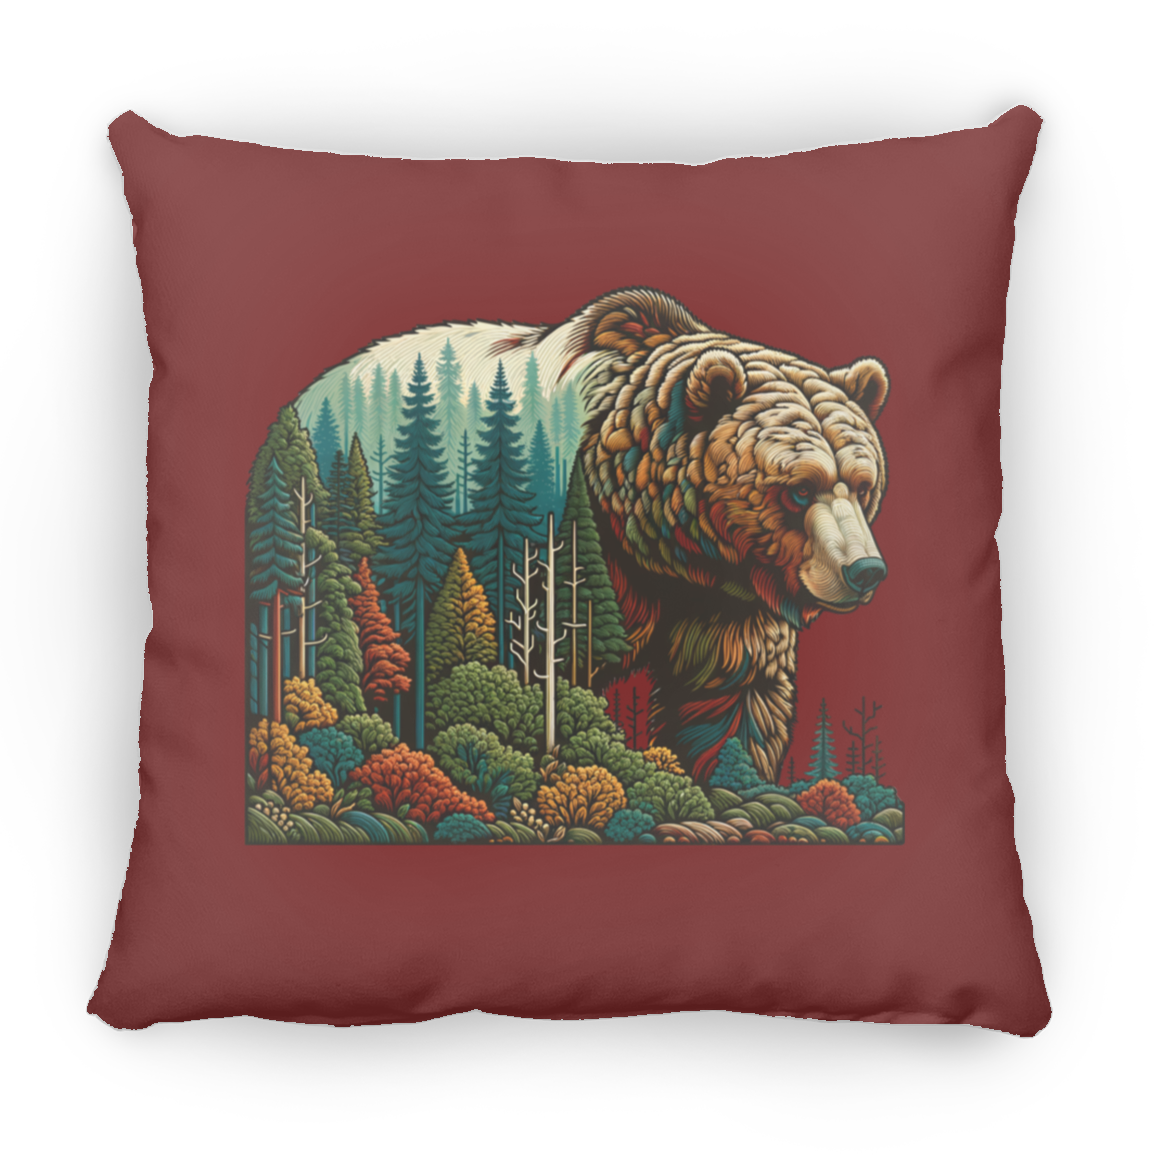 Guardian Grizzly - Pillows